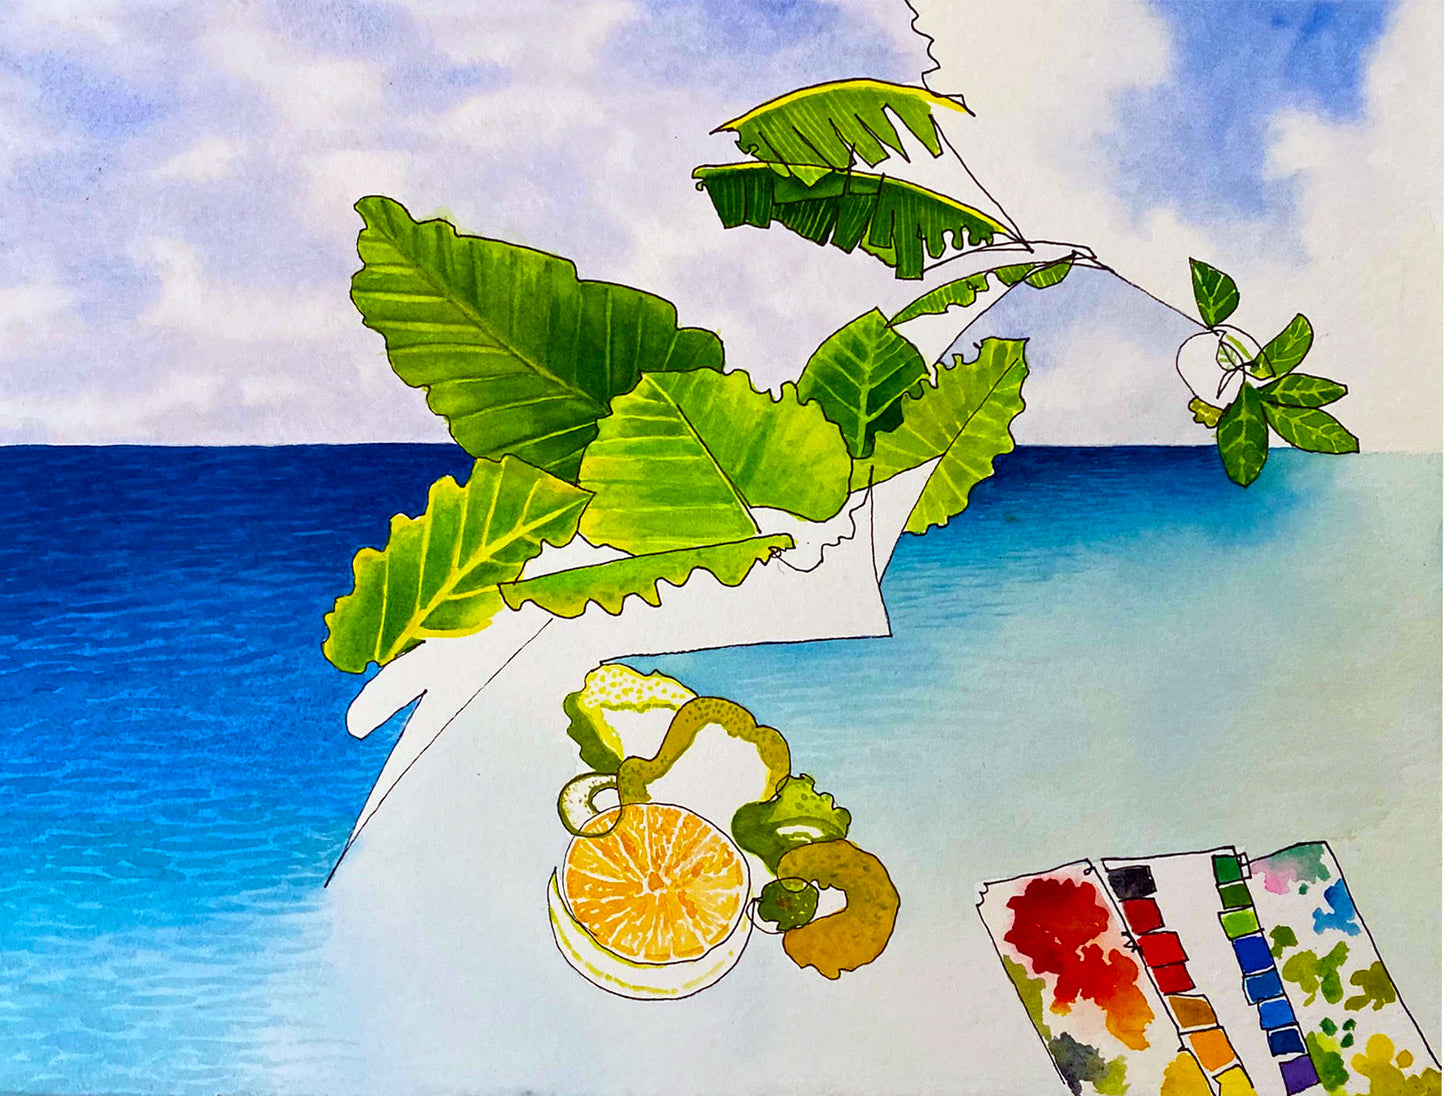 Archive - Watercolor + Ink on Paper -  2 Jamaican Kitchens